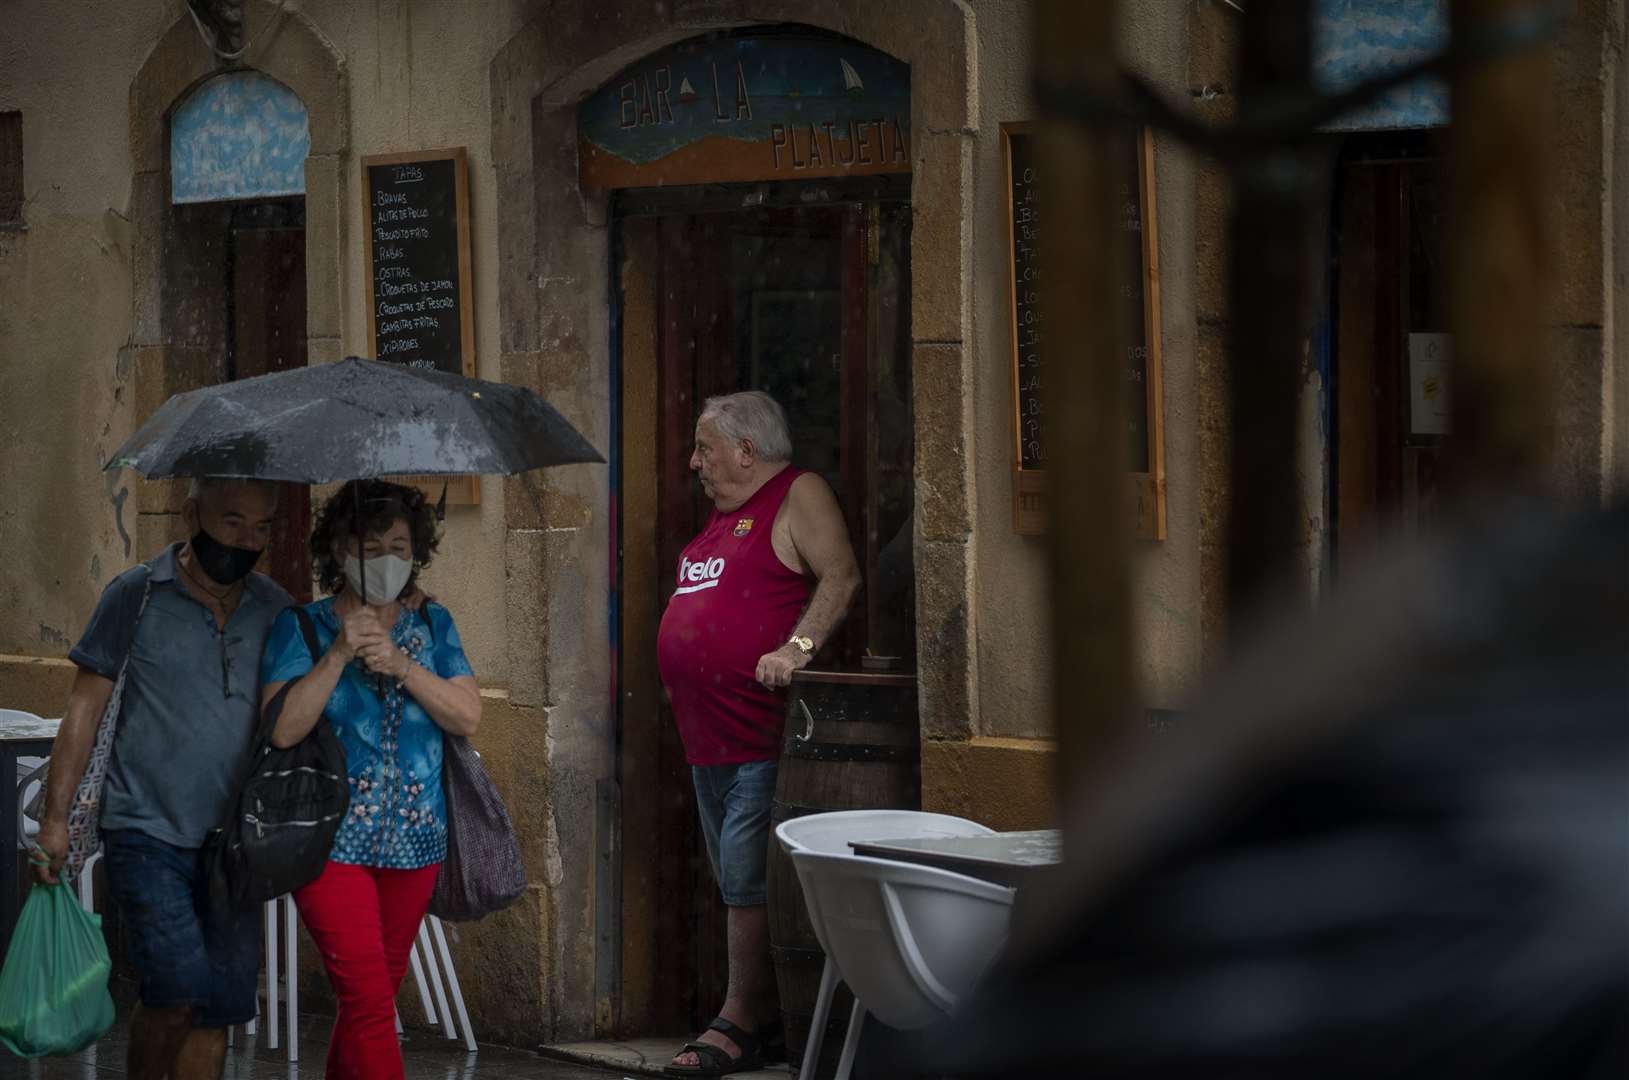 A man stands in a bar entrance as people walk by in Barcelona, Spain (Emilio Morenatti/AP)